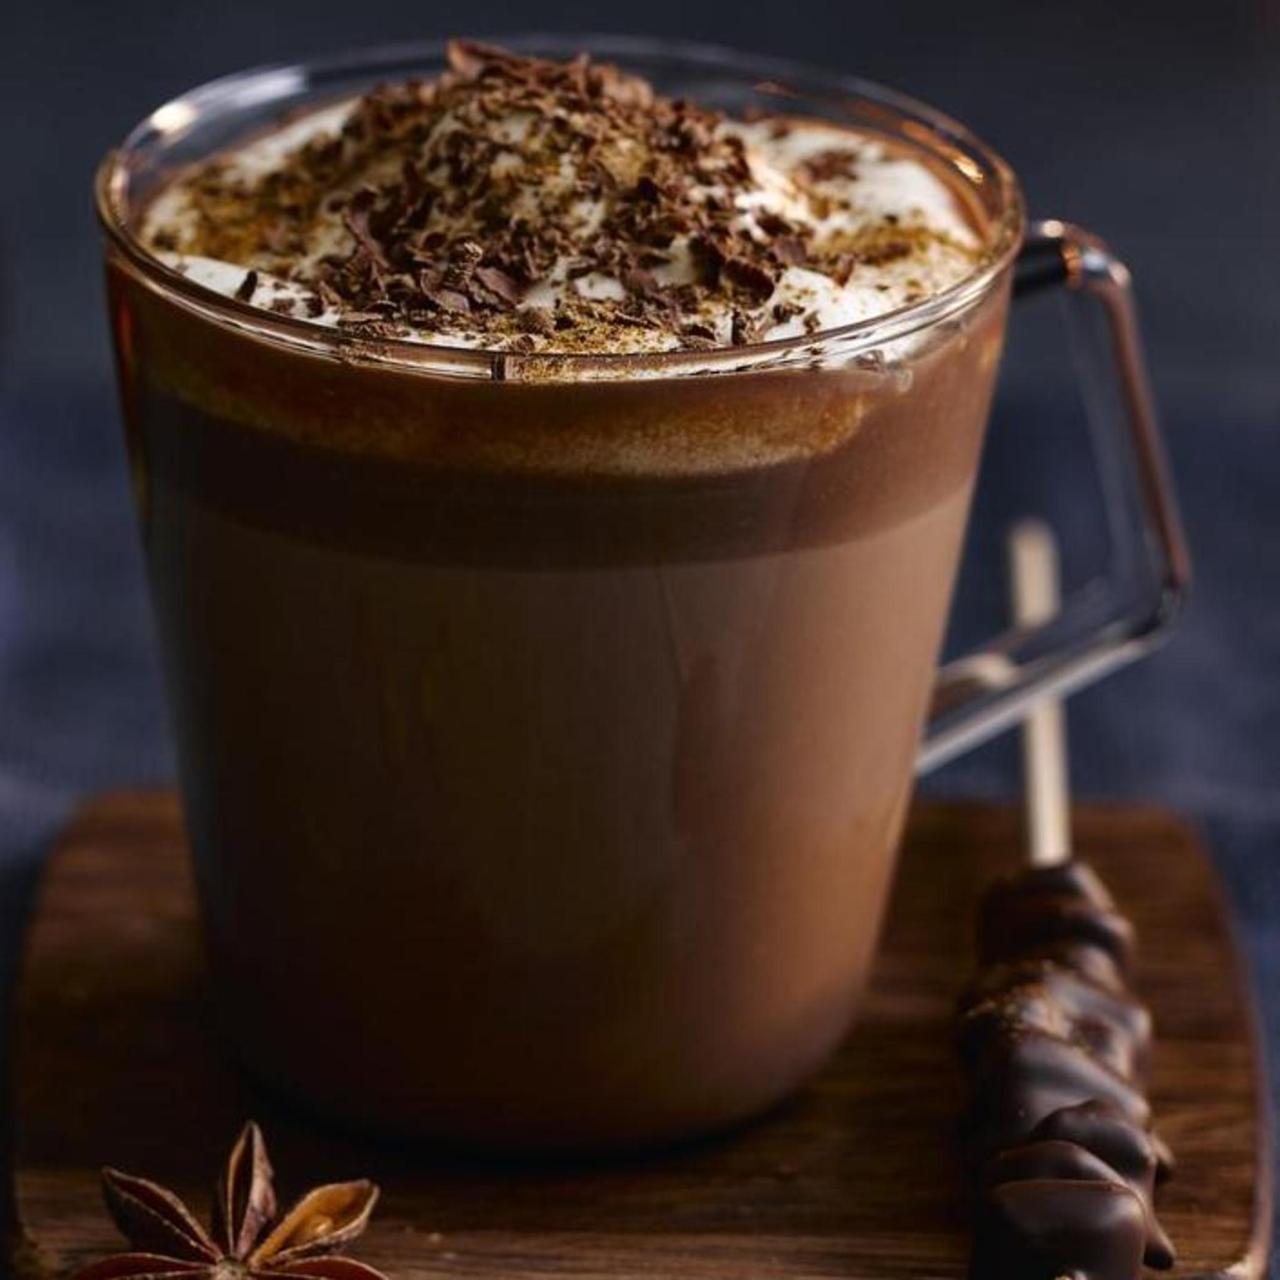 Spiced hot chocolate with whisky | Cook With M&S